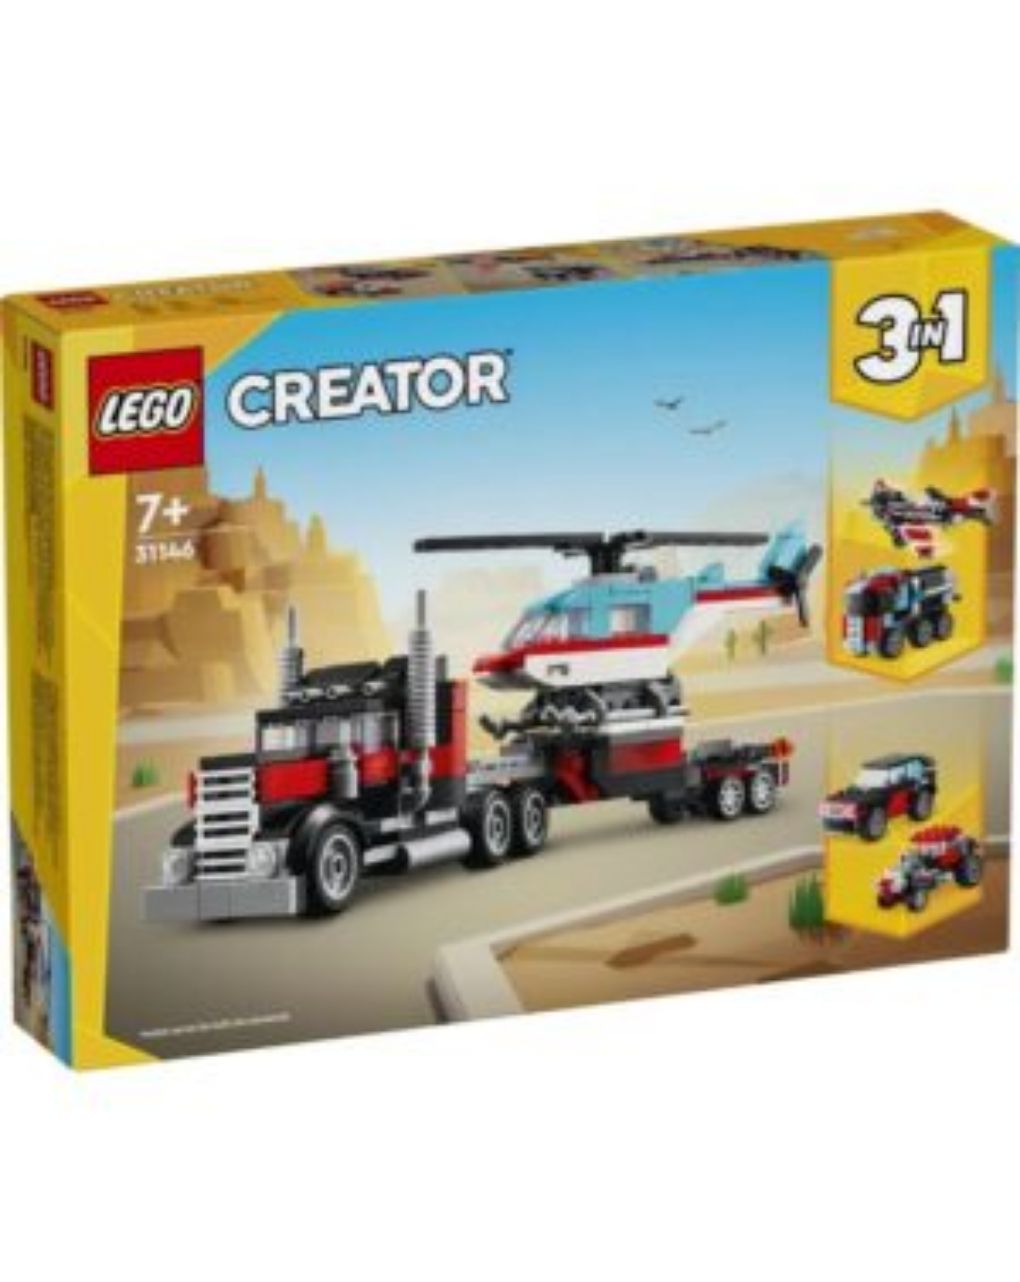 Lego creator 3 in 1 flatbed with helicopter 31146 - Lego